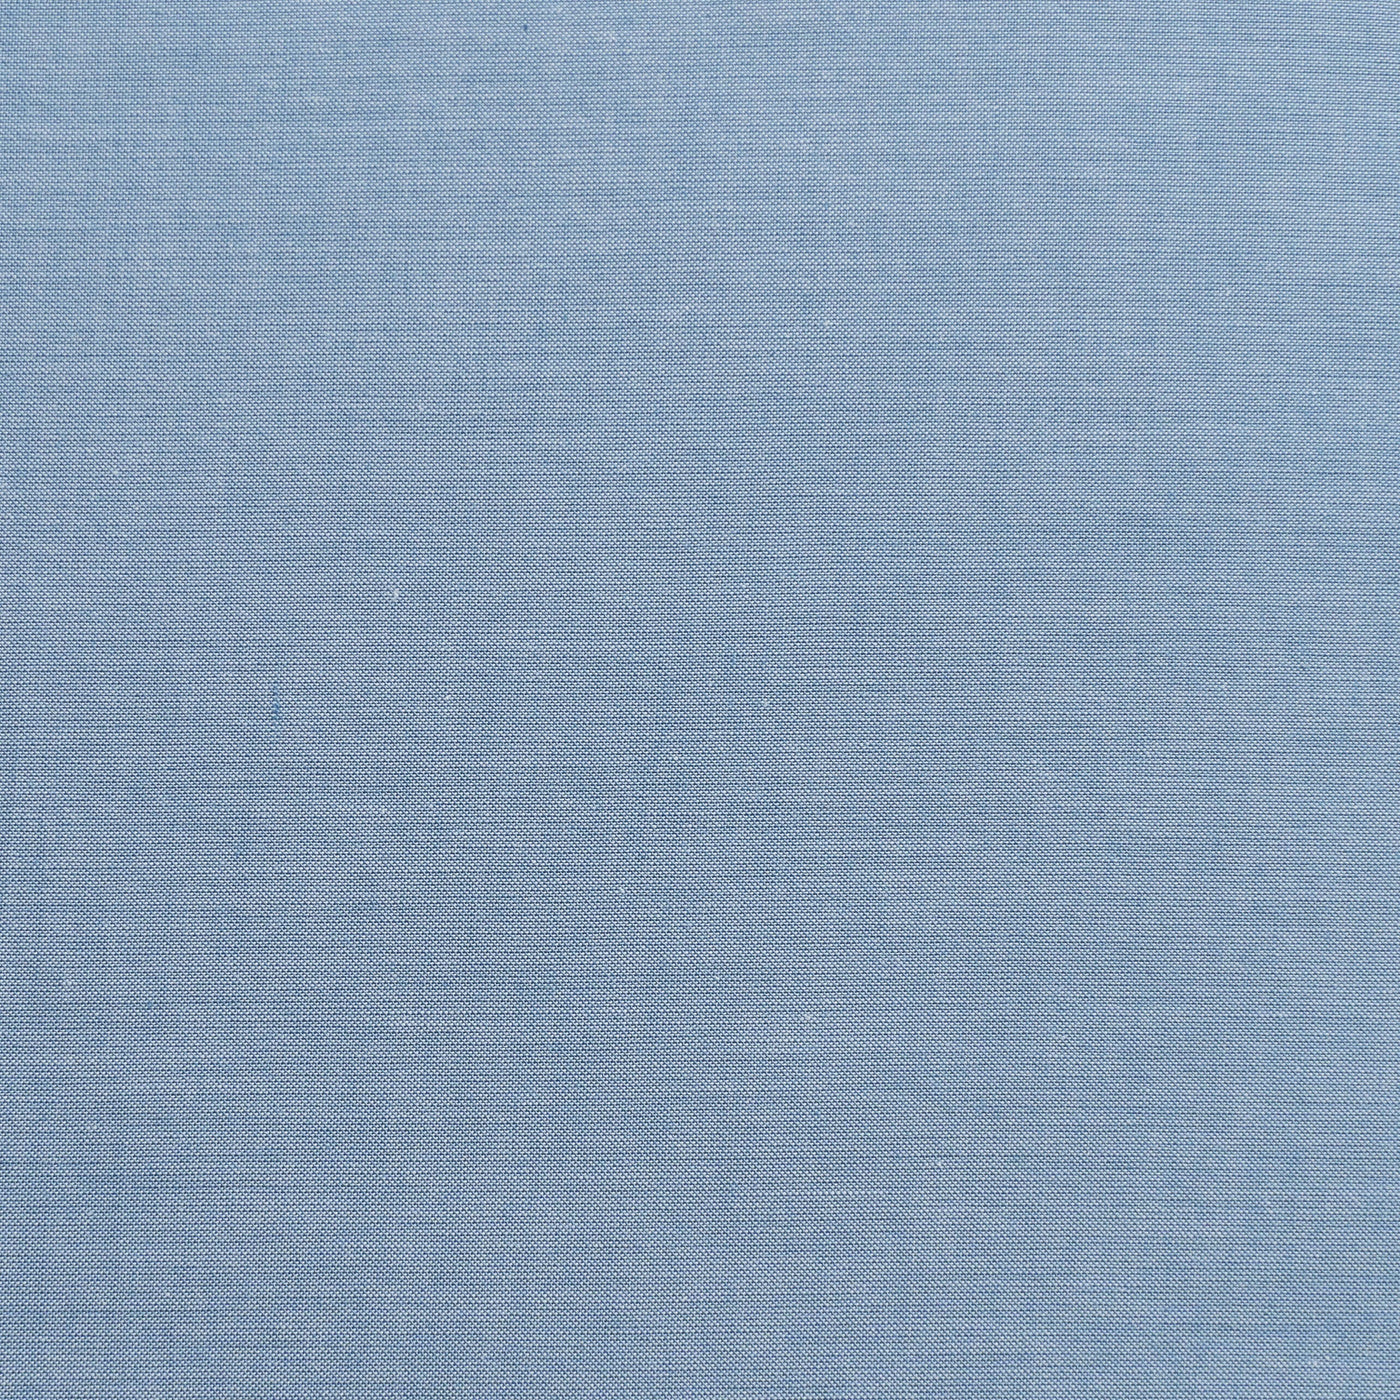 Chambray cotton Tilda fabric by the Fat quarter: various colours.